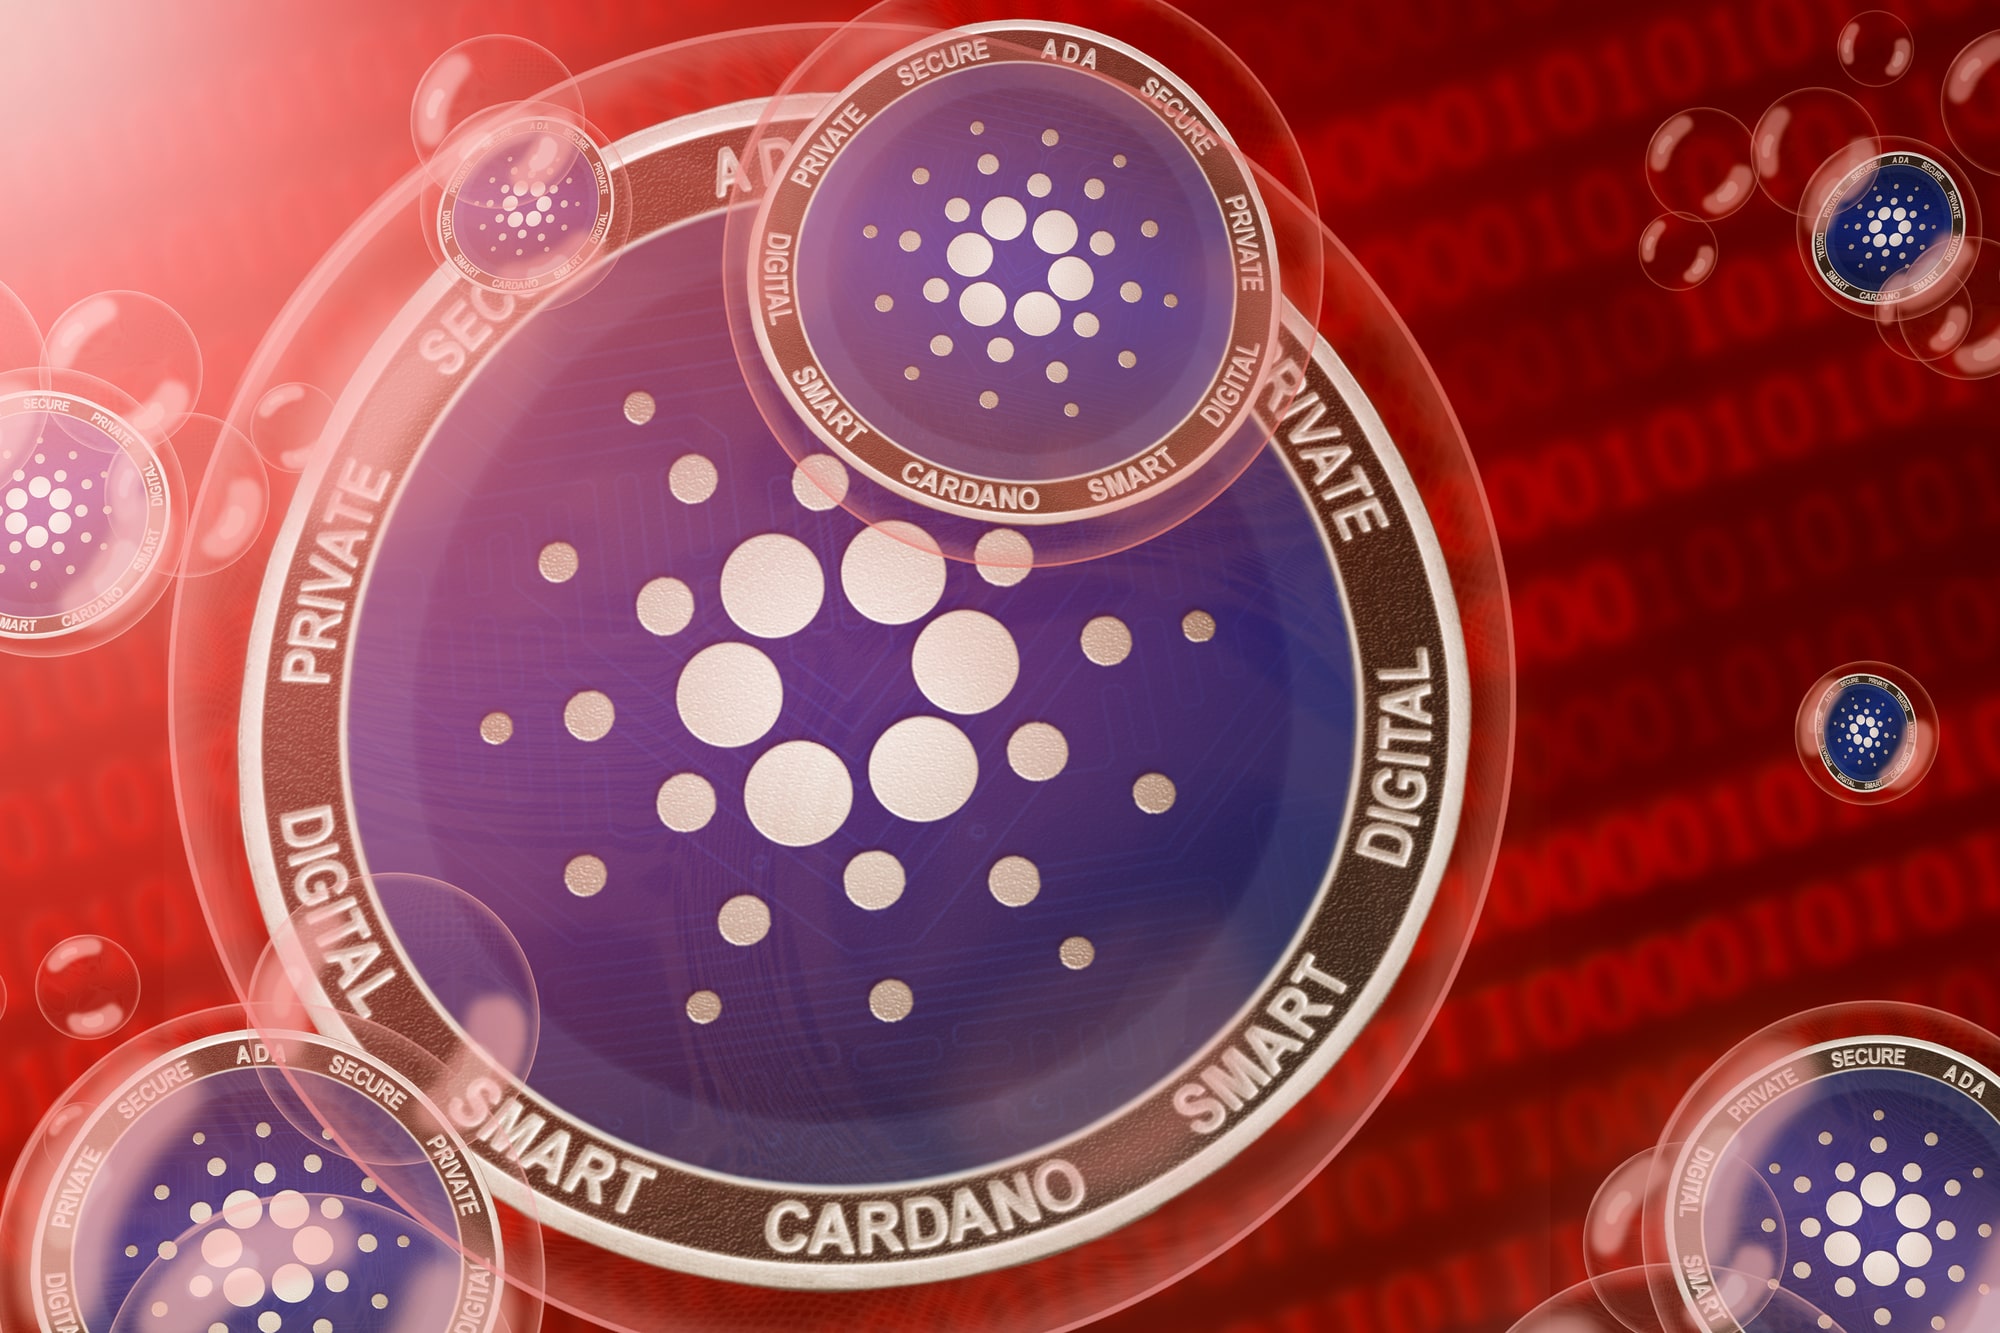 Cardano’s Ethereum-сompatible sidechain project opens entry into the DeFi space